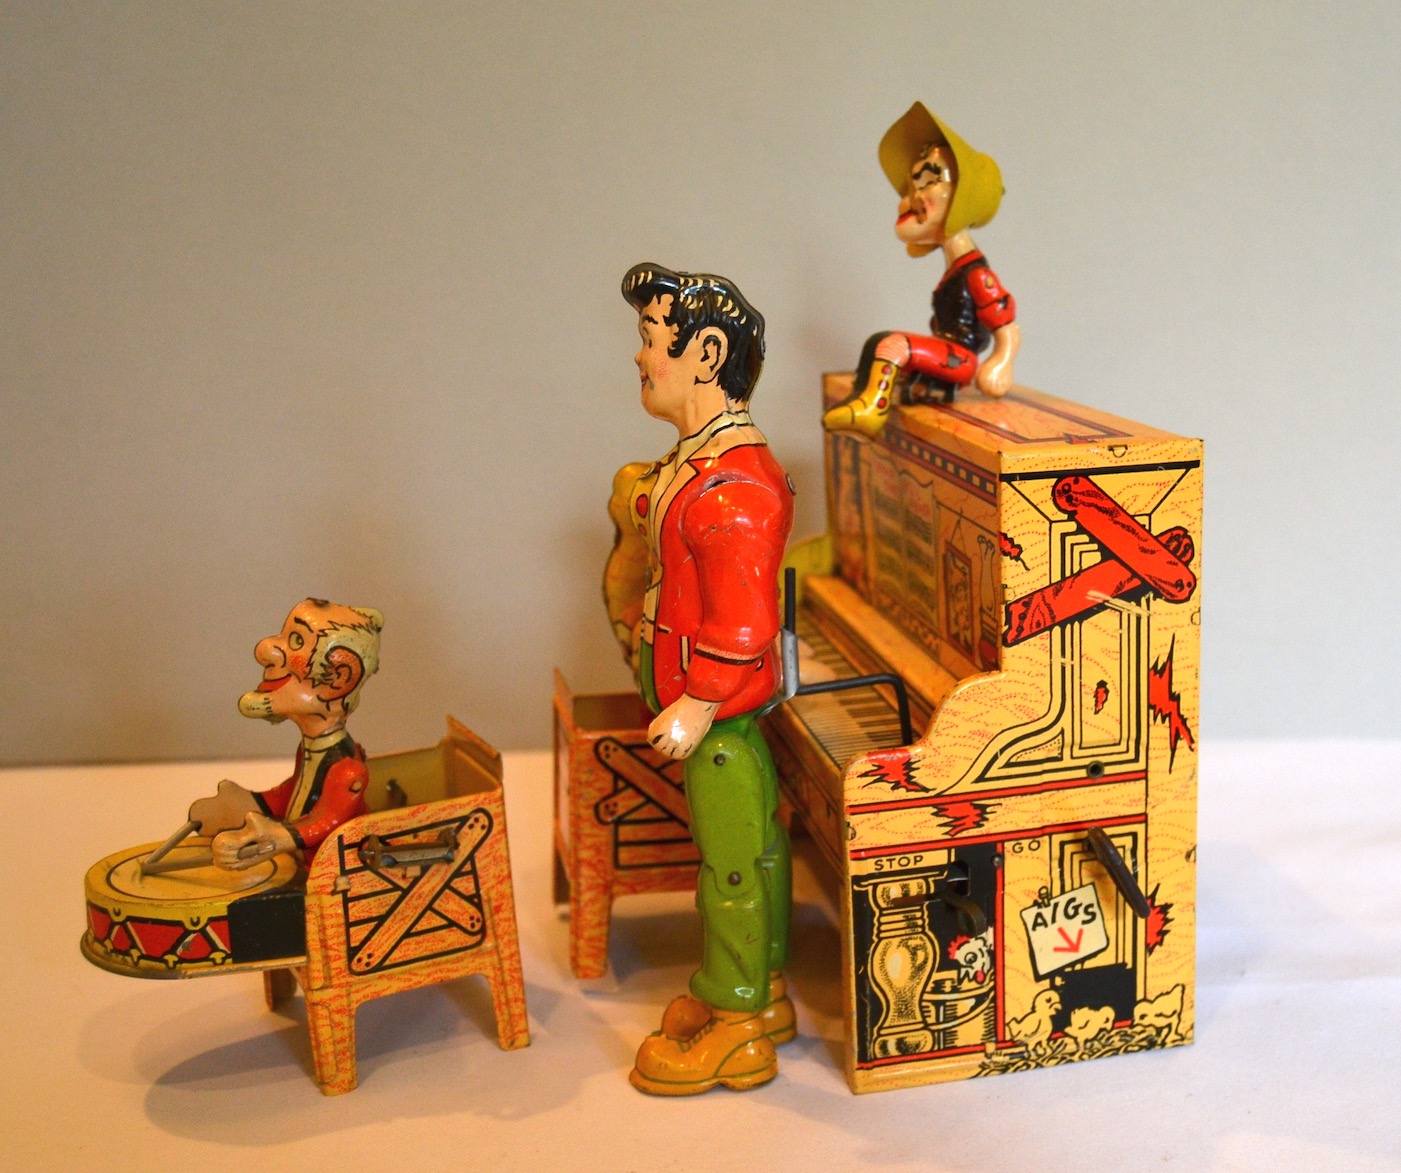 Bargain John's Antiques  Lil'l Abner and His Dog Patch Band Antique Wind  Up Toy in Box - Bargain John's Antiques